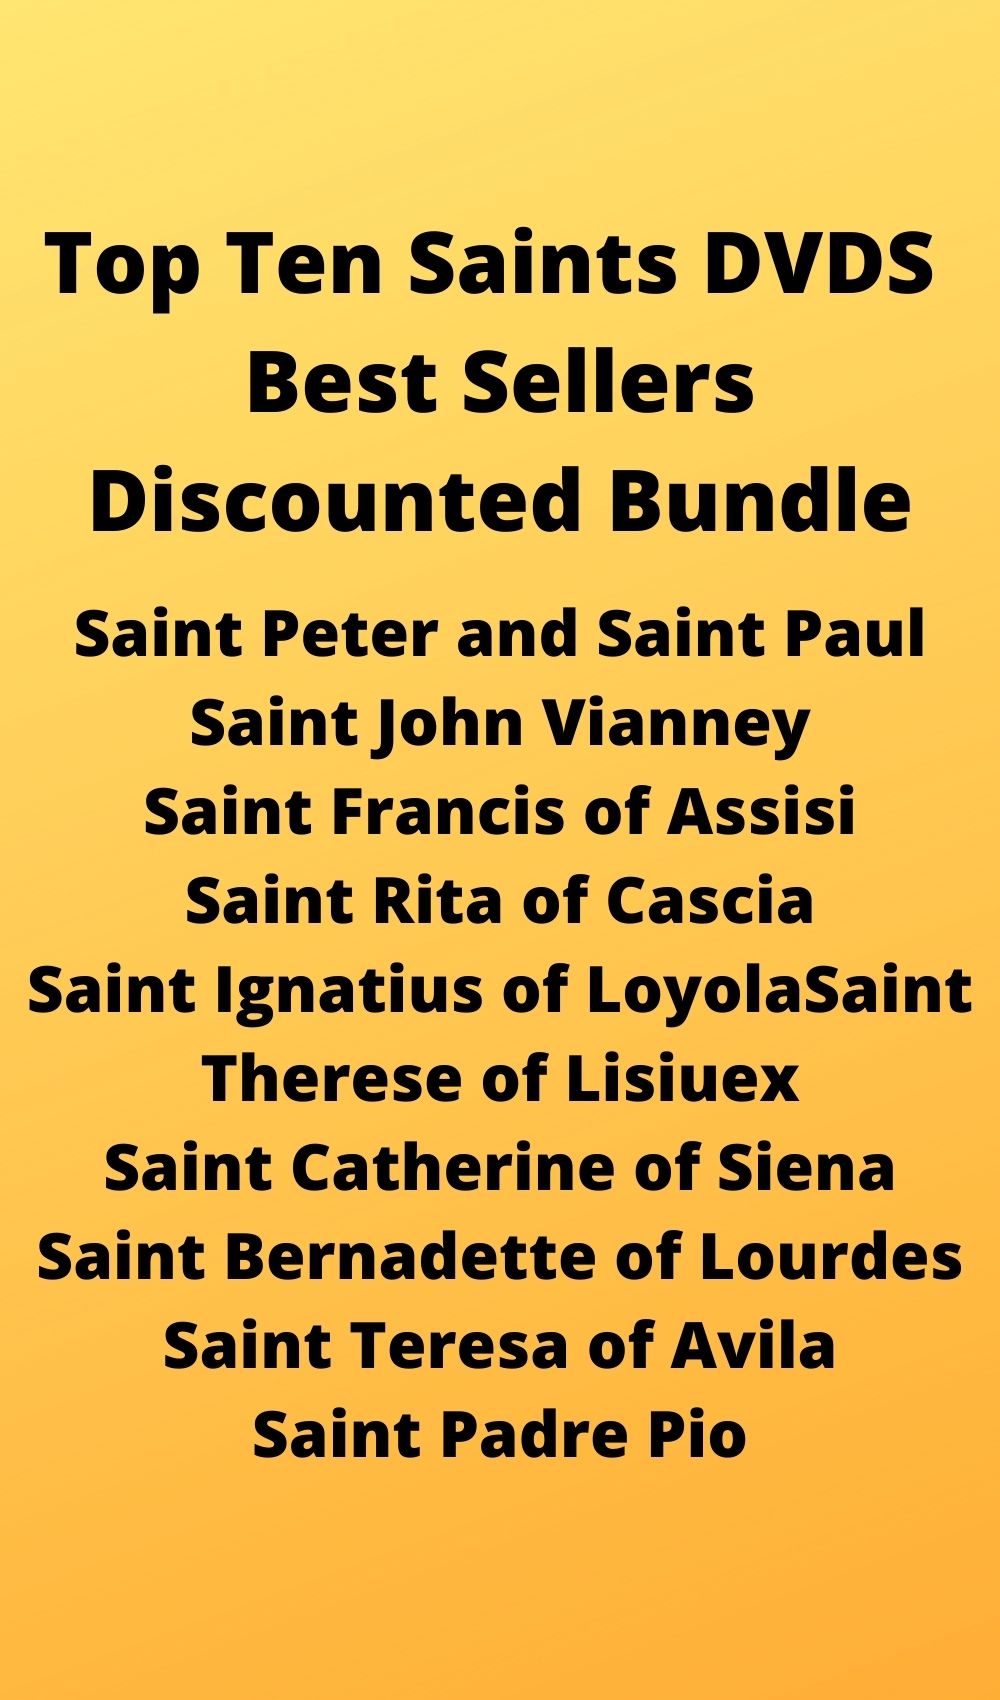 Top Ten Sai nts DVDS Best Sellers Discounted Bundle - Bob and Penny Lord